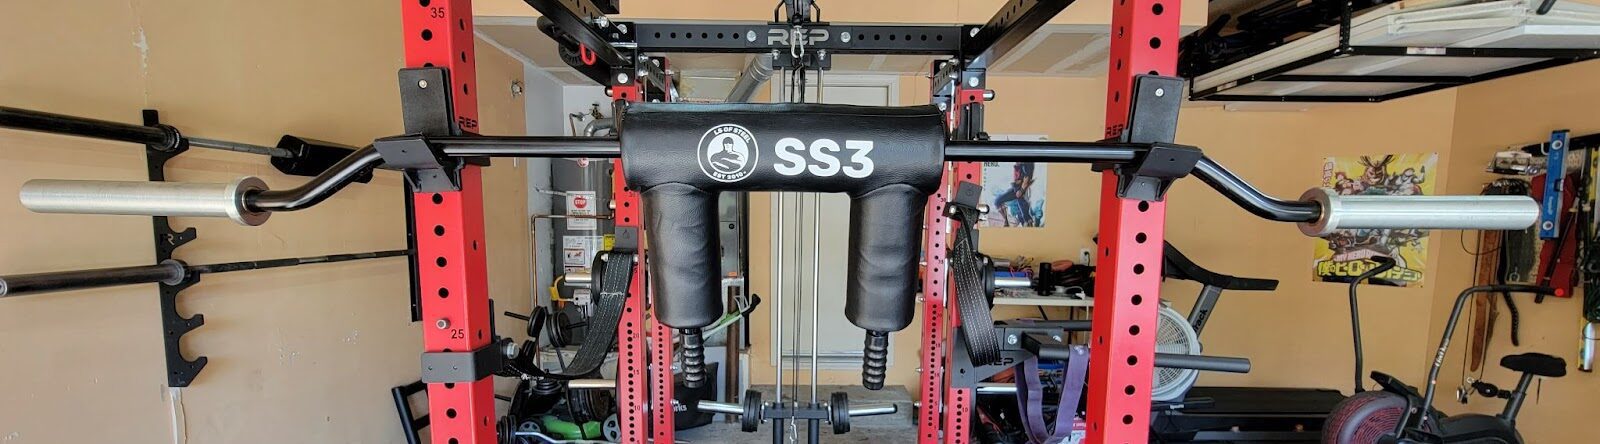 Bells Of Steel Safety Squat Bar Review – Multiple Handles Included